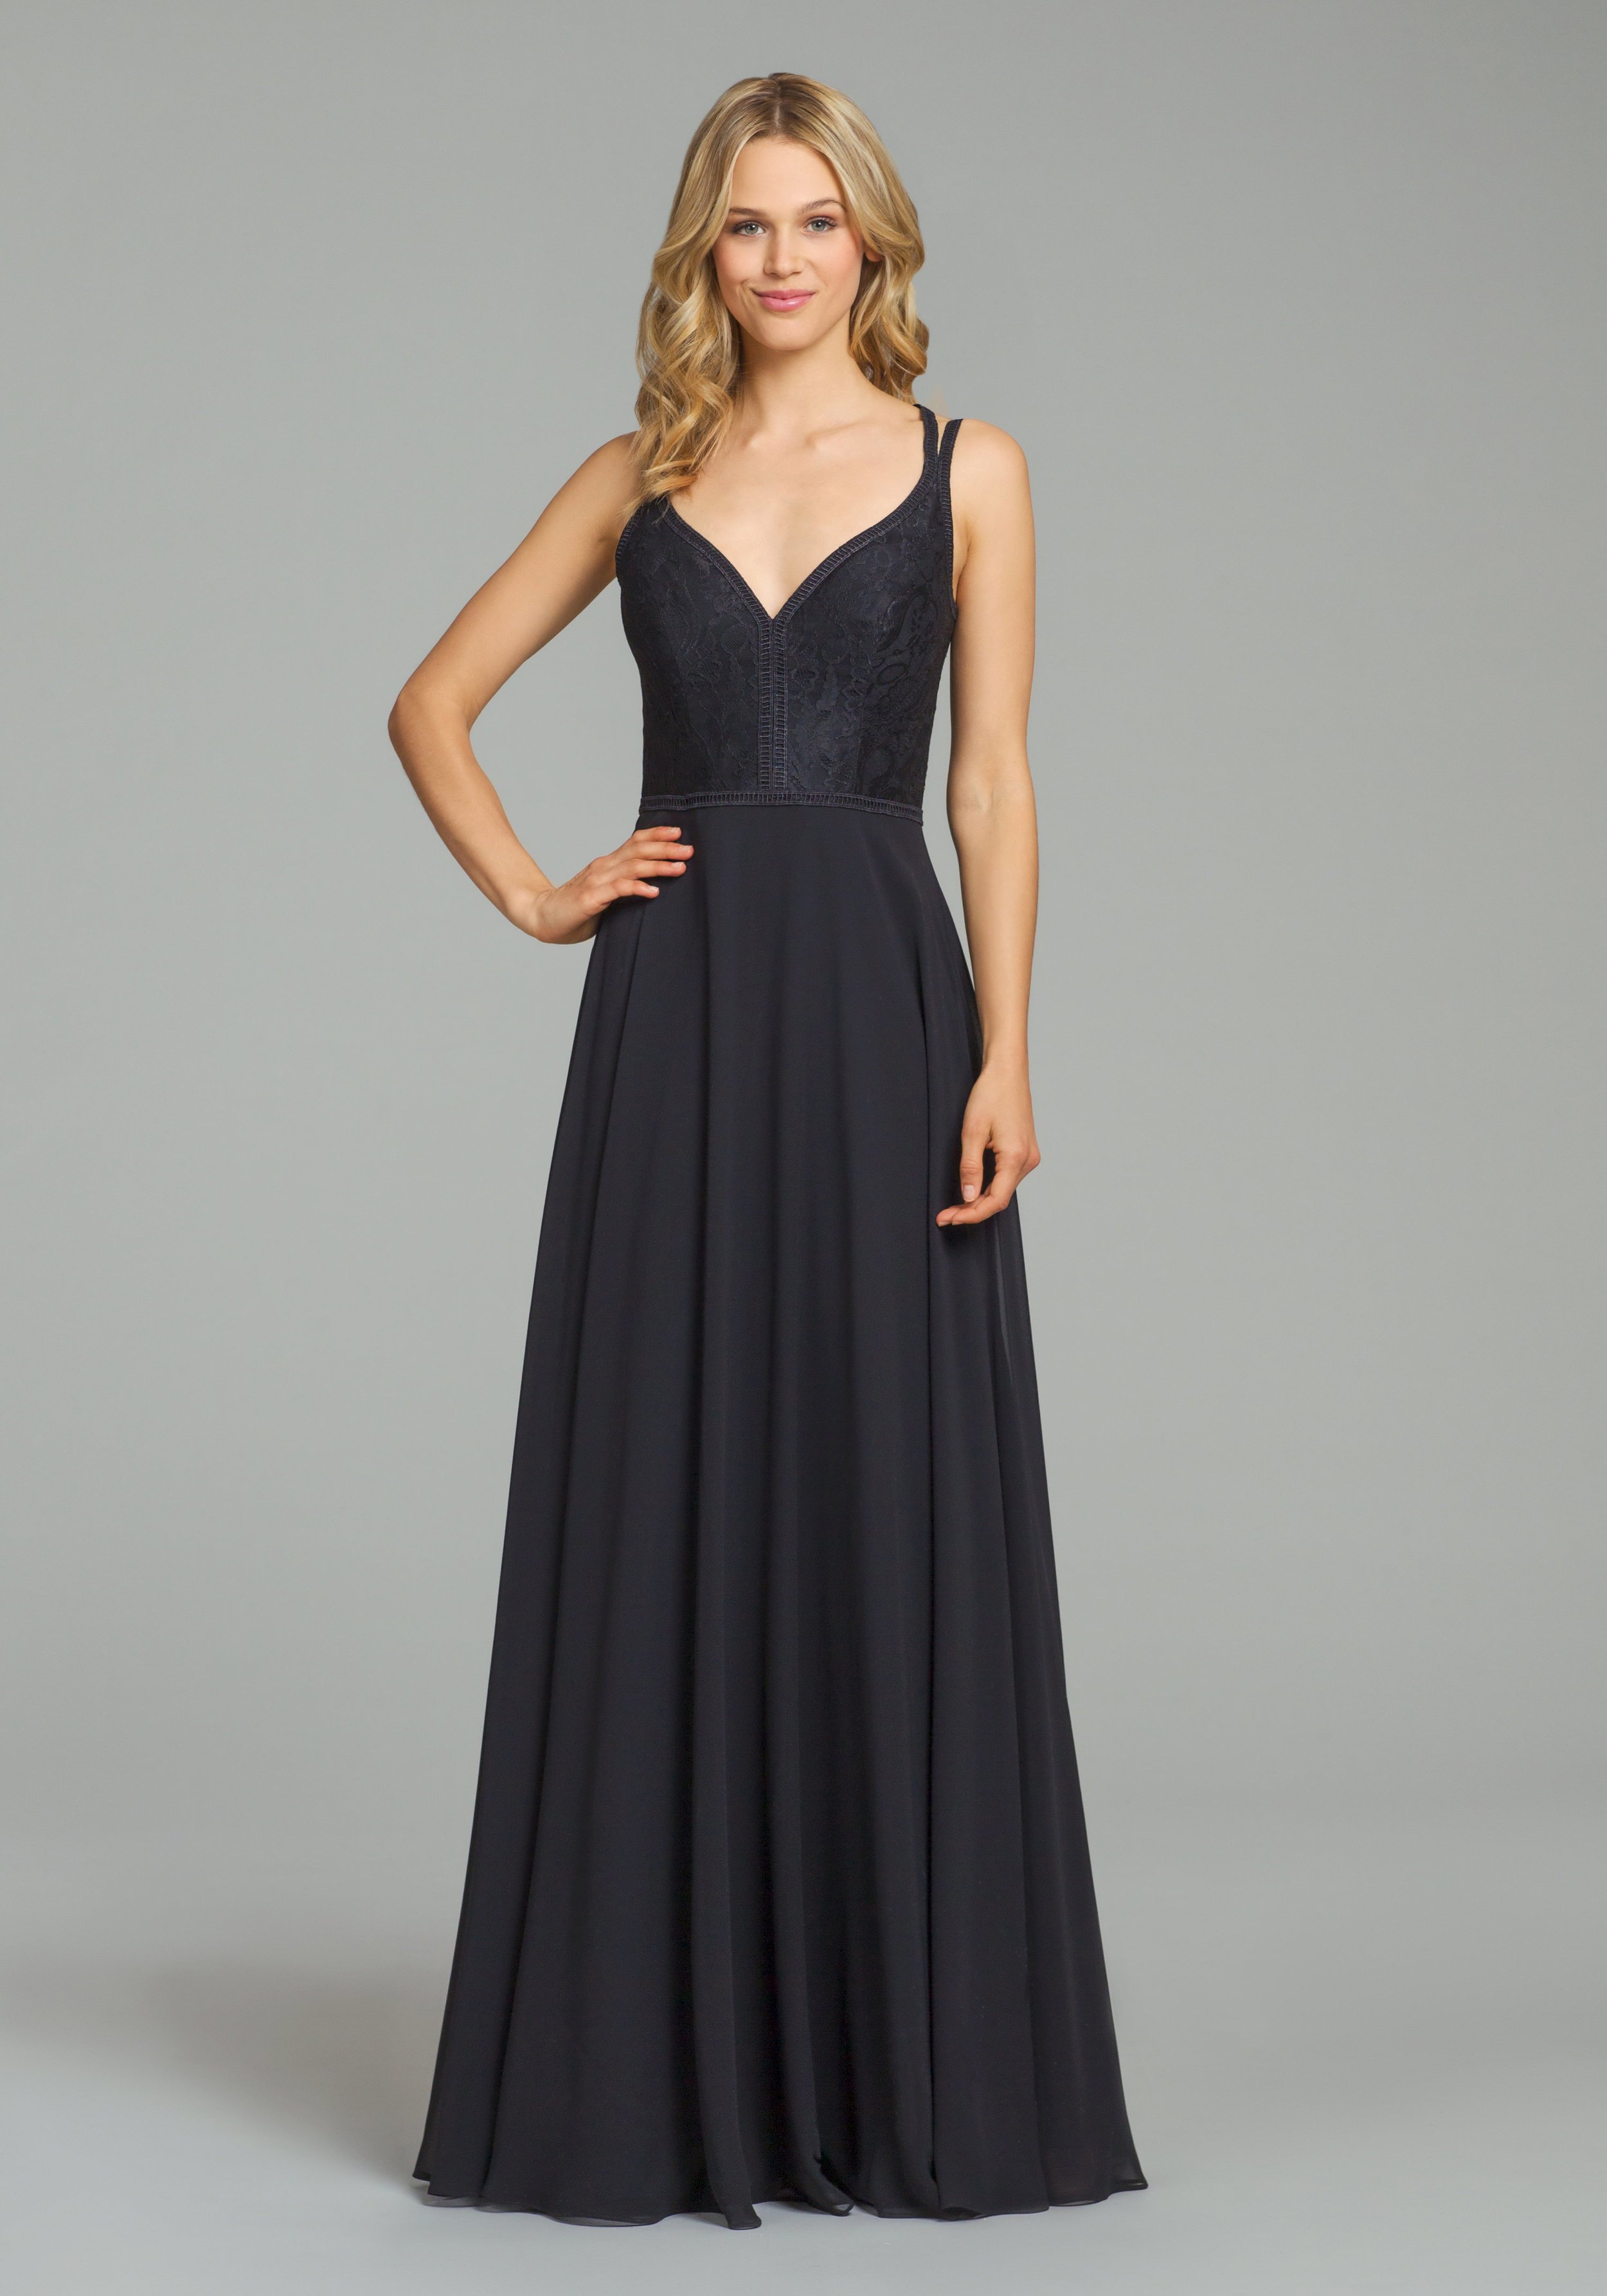 hayley-paige-occasions-bridesmaids-fall-2018-style-5864.jpg